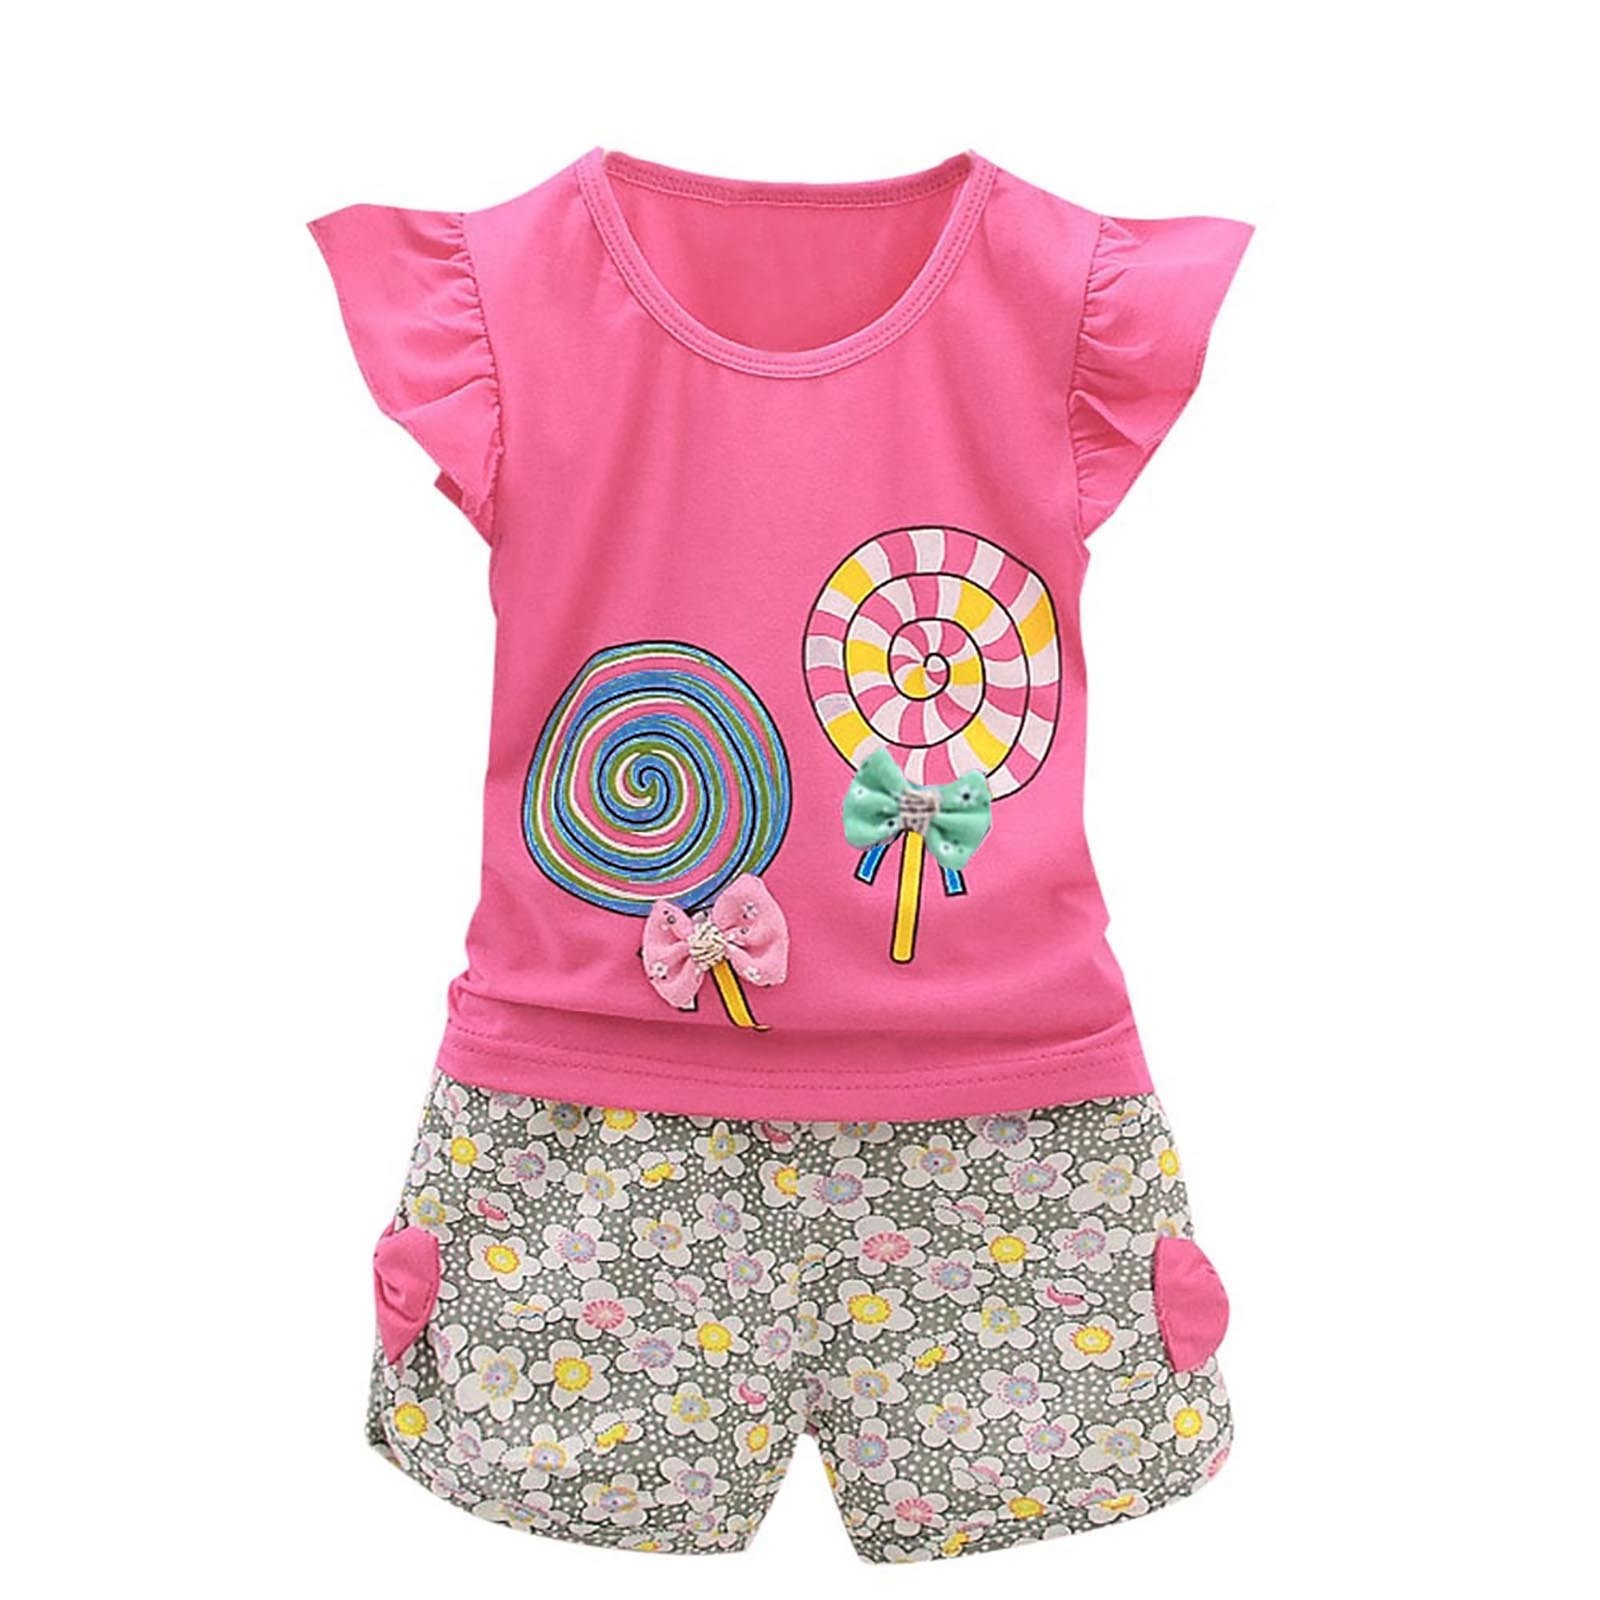 ZHAGHMIN Outfits For Kids T-Shirt Lolly Girls 2Pcs Pants Toddler Outfits Set Baby Clothes Kids Tops+Short Girls Outfits&Set Baby Wrap For Girls 8 Girls Outfits Baby Blankets For Girls Size Small Gir - image 1 of 9